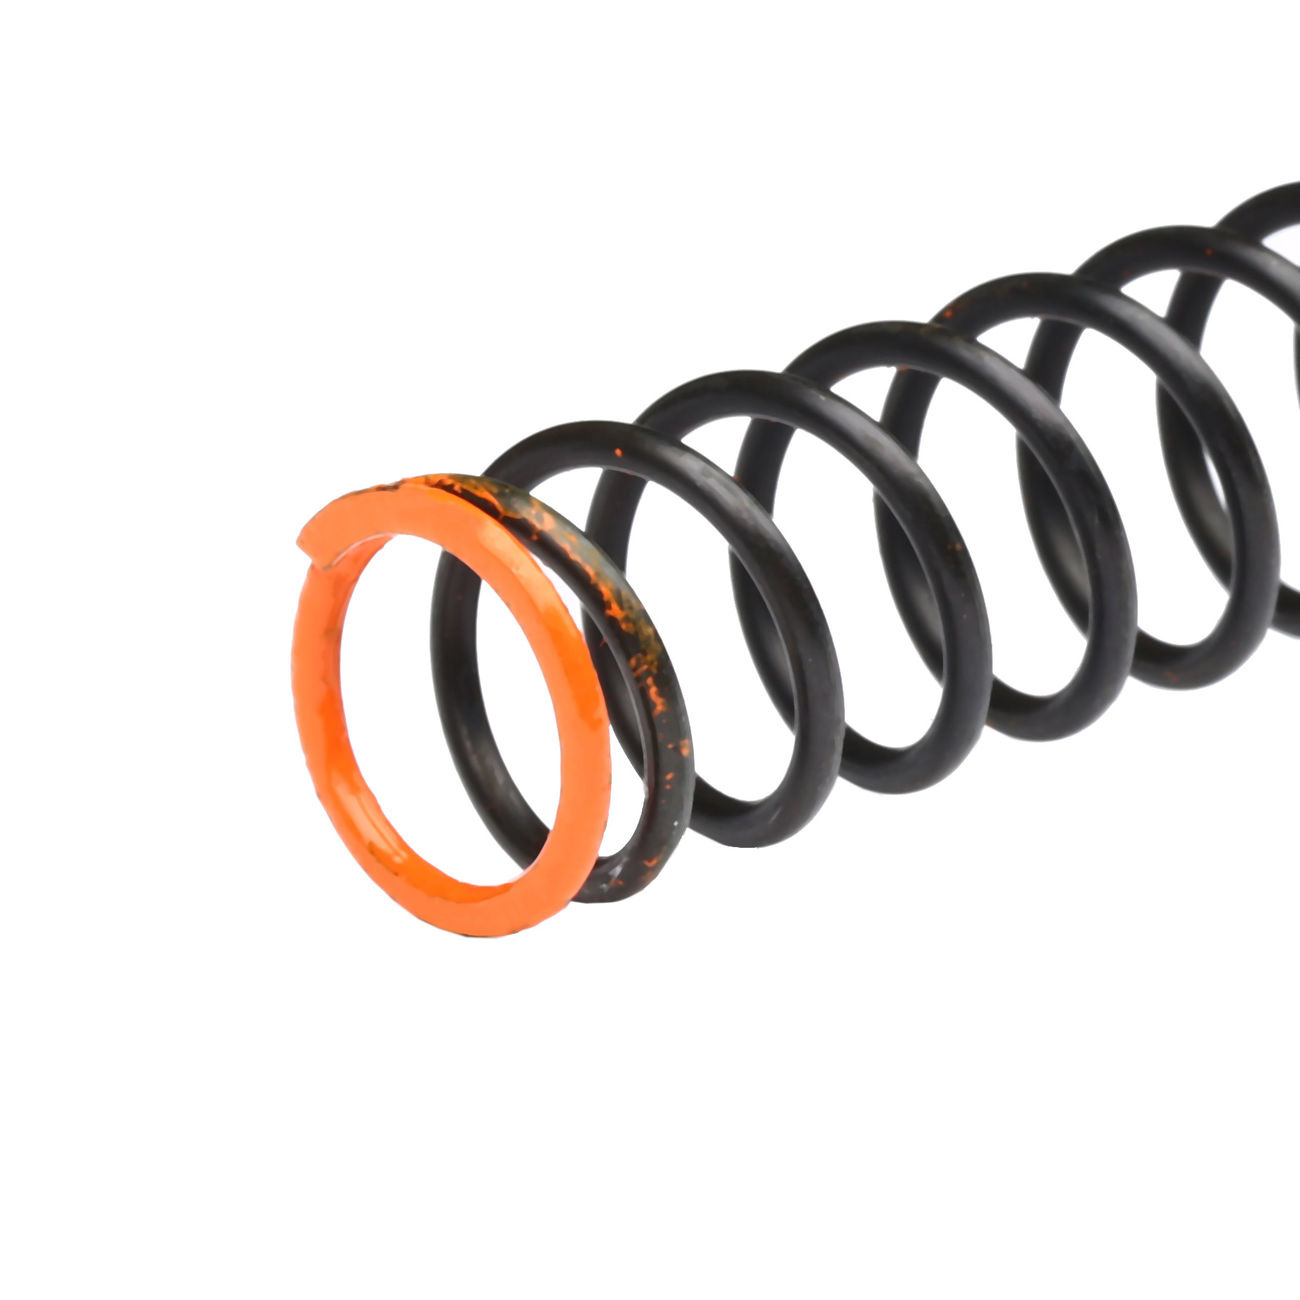 ASG M125 Ultimate Upgrade Tuning Spring